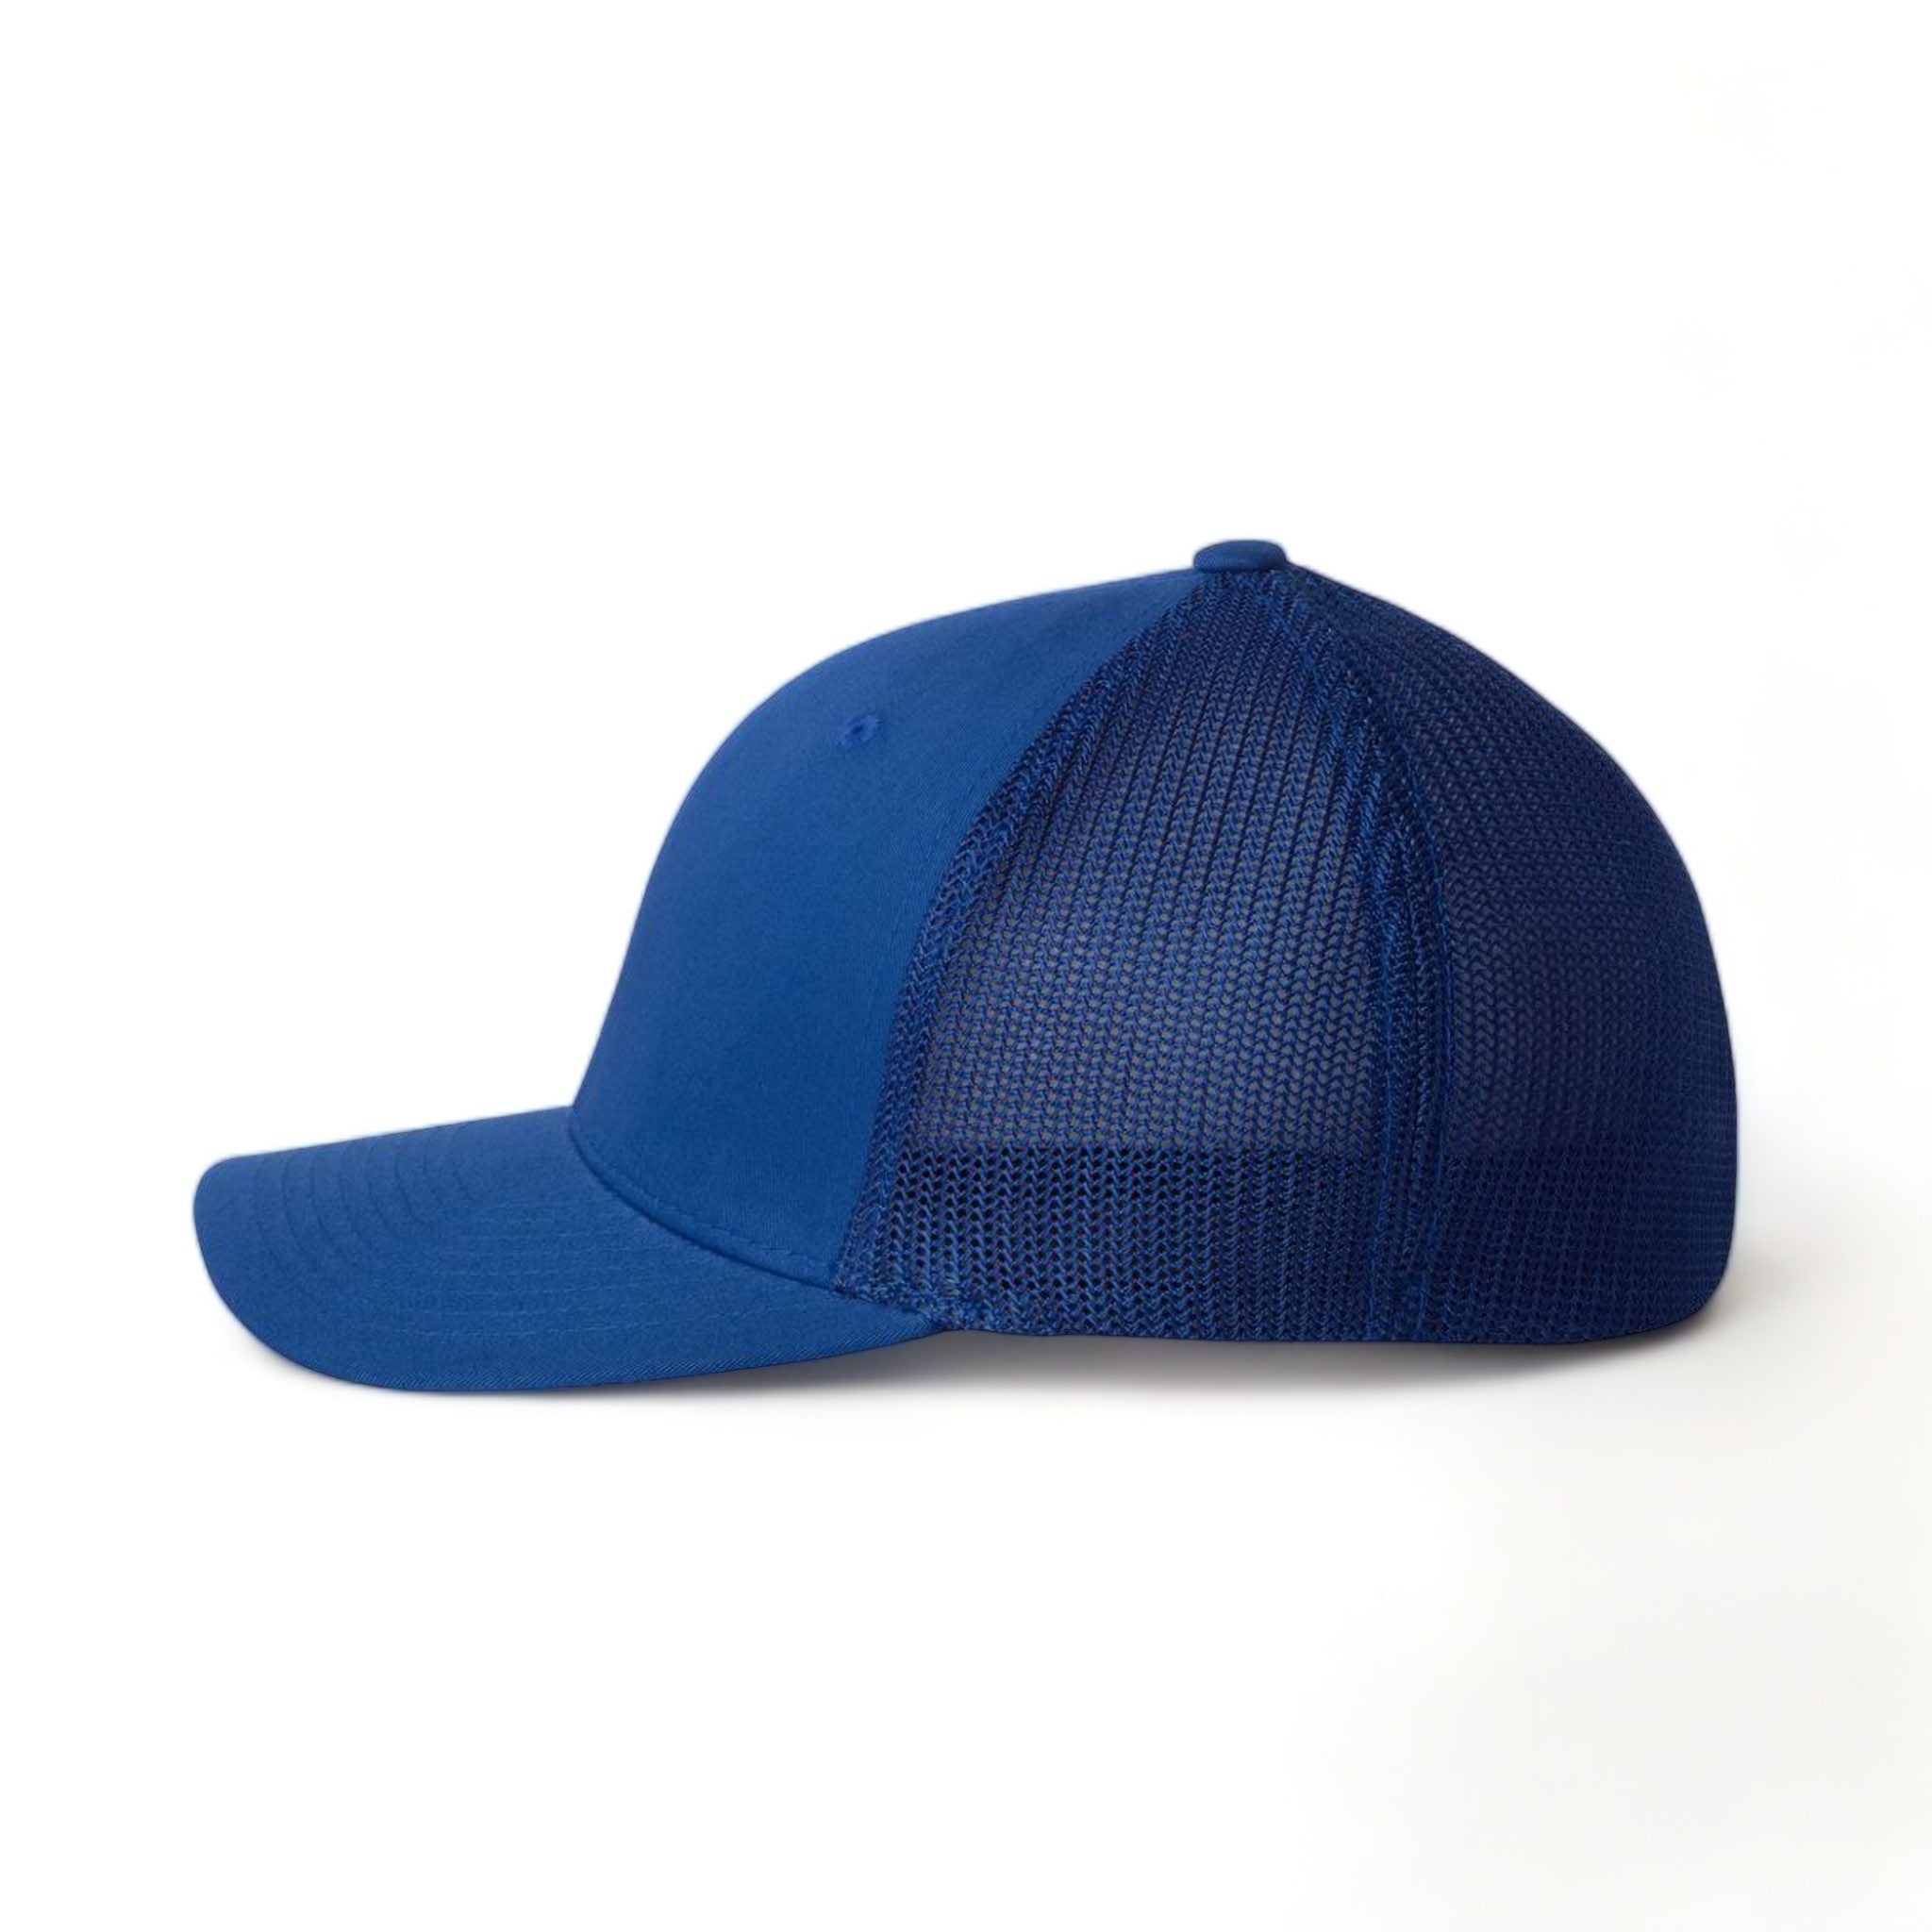 Side view of Flexfit 6511 custom hat in royal and blue